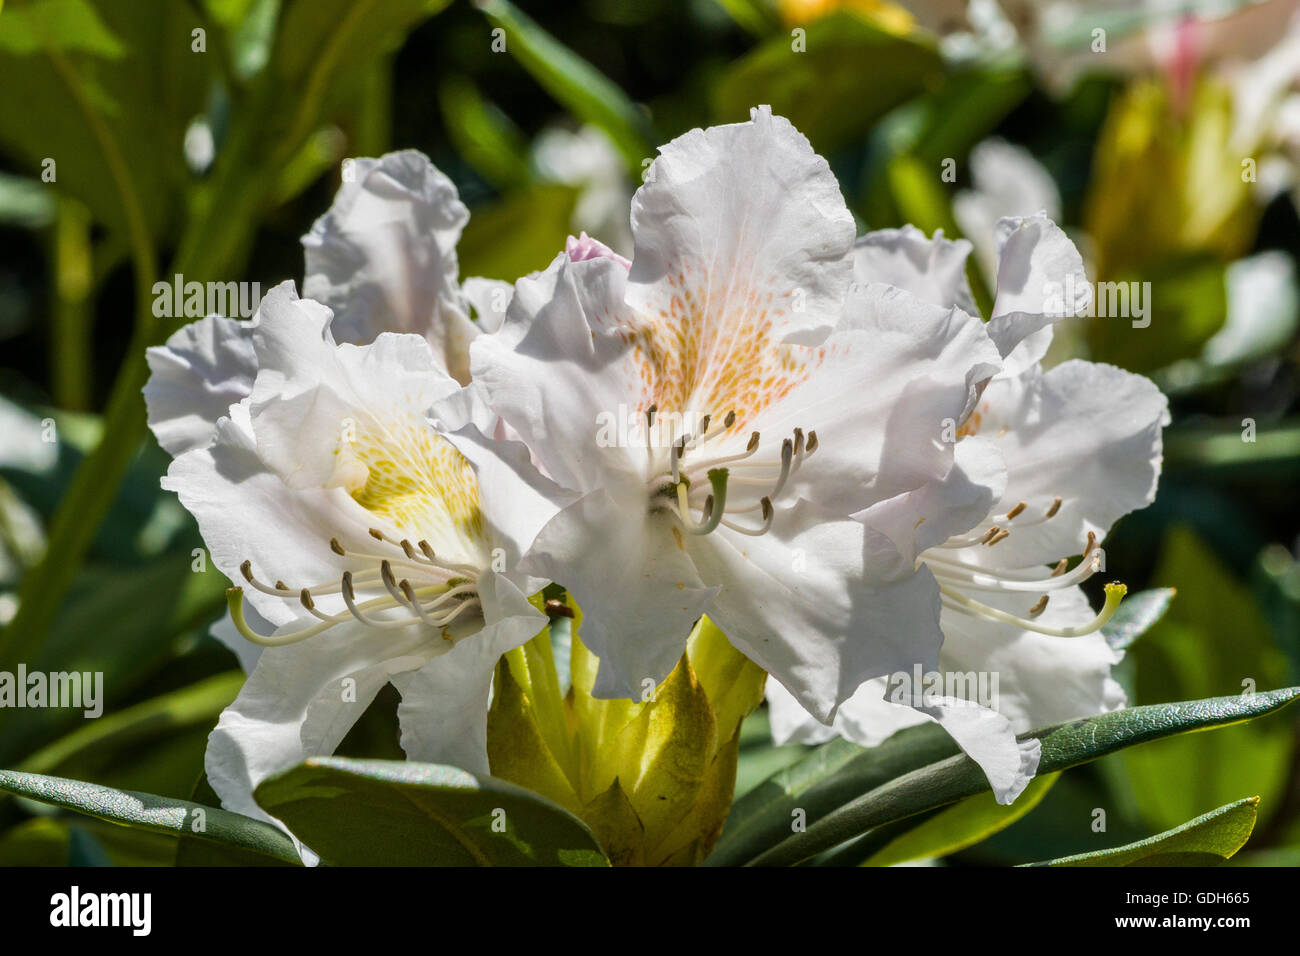 Blooming white blossom of a rhododendron bush (Rhododendron wardii var. puralbum), Dresden, Saxony, Germany Stock Photo